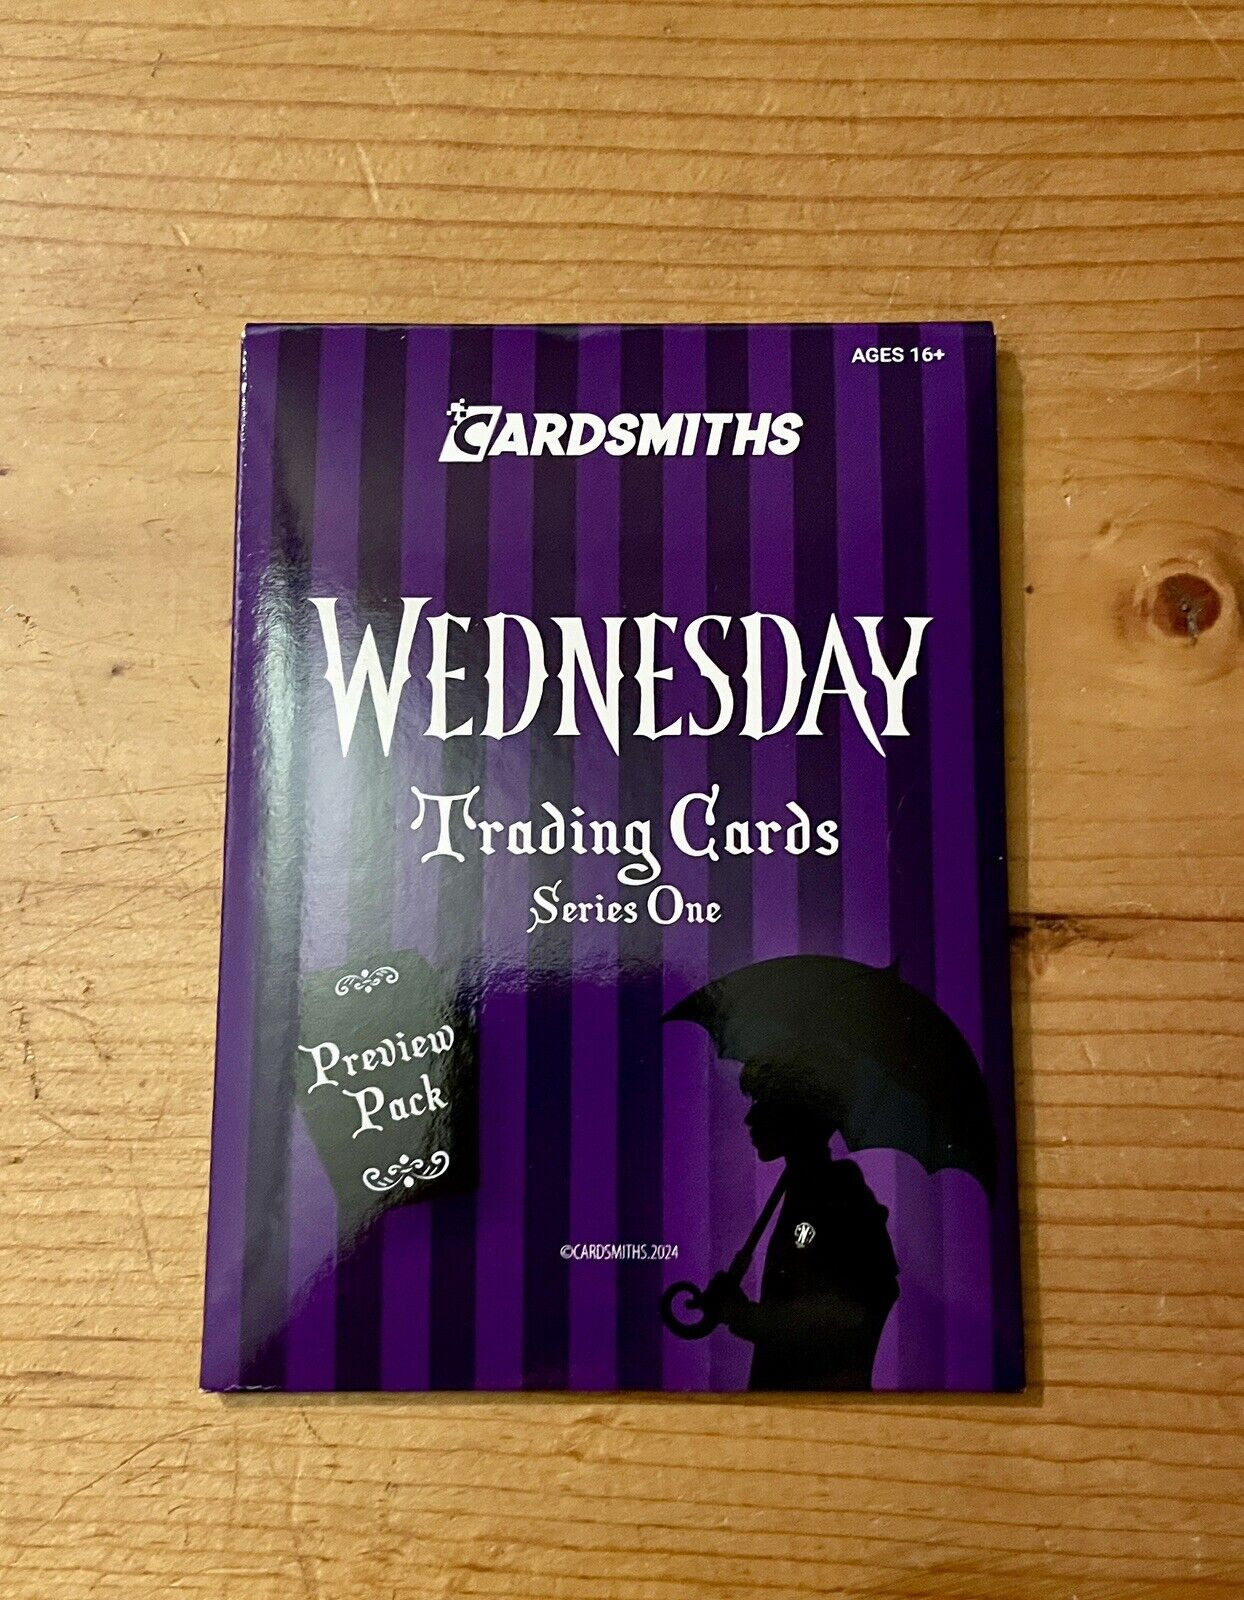 Wednesday Adams Cardsmiths Series 1 Preview Pack